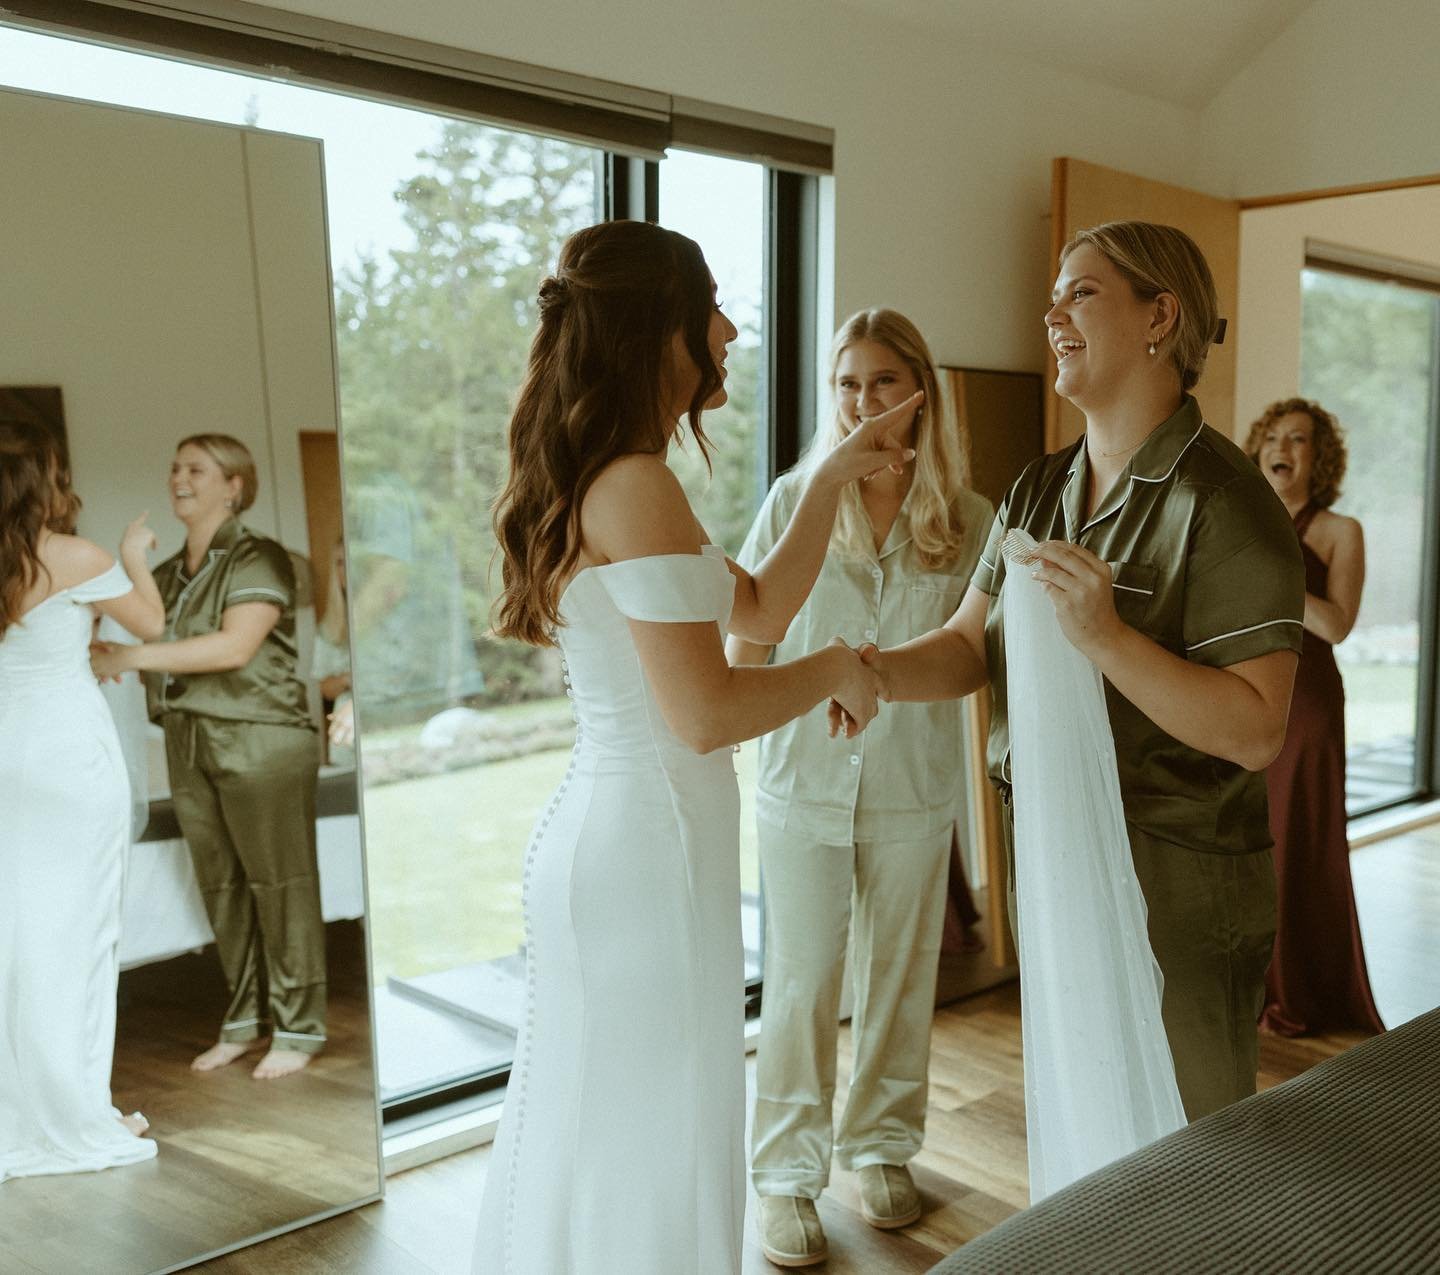 There&rsquo;s nothing quite like the excitement of a bride getting ready for her big day, surrounded by her closest friends. The laughter, the anticipation, the final touches of make-up and the shared memories, create an unforgettable atmosphere. It&